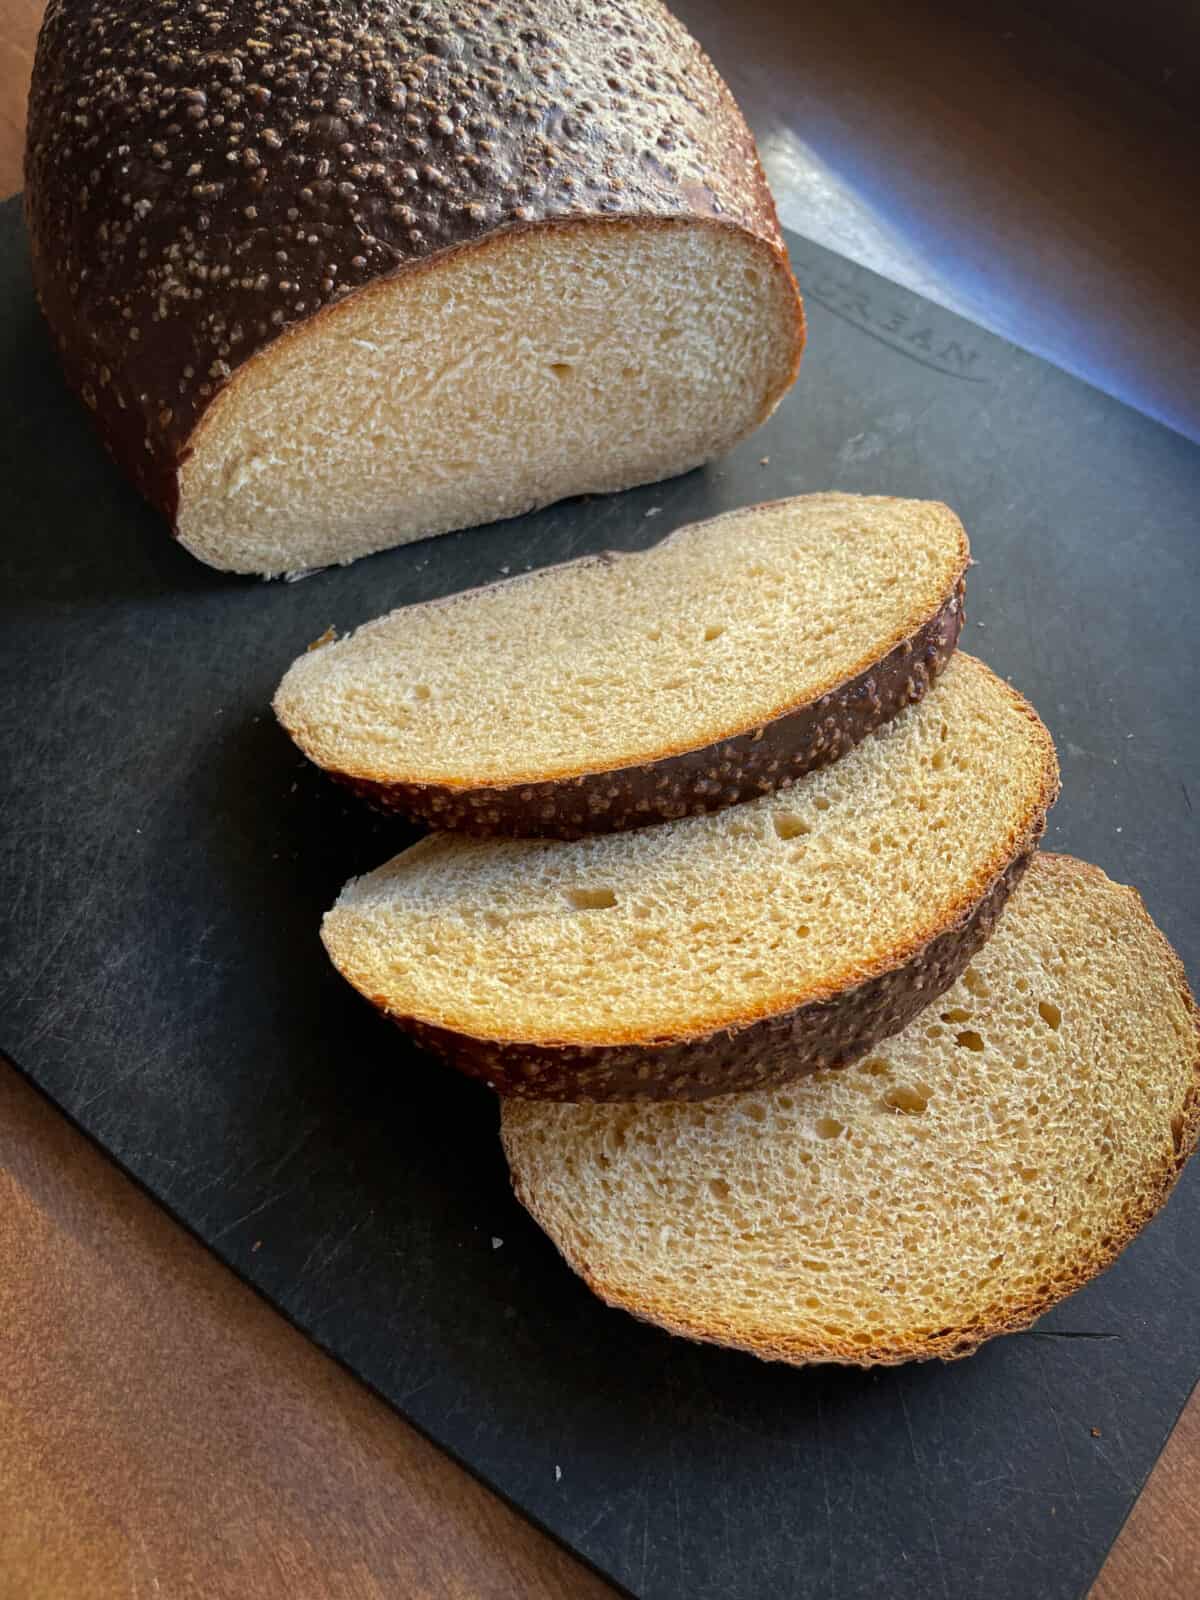 free-standing loaf of pretzel bread made with lye and cut into three slices.